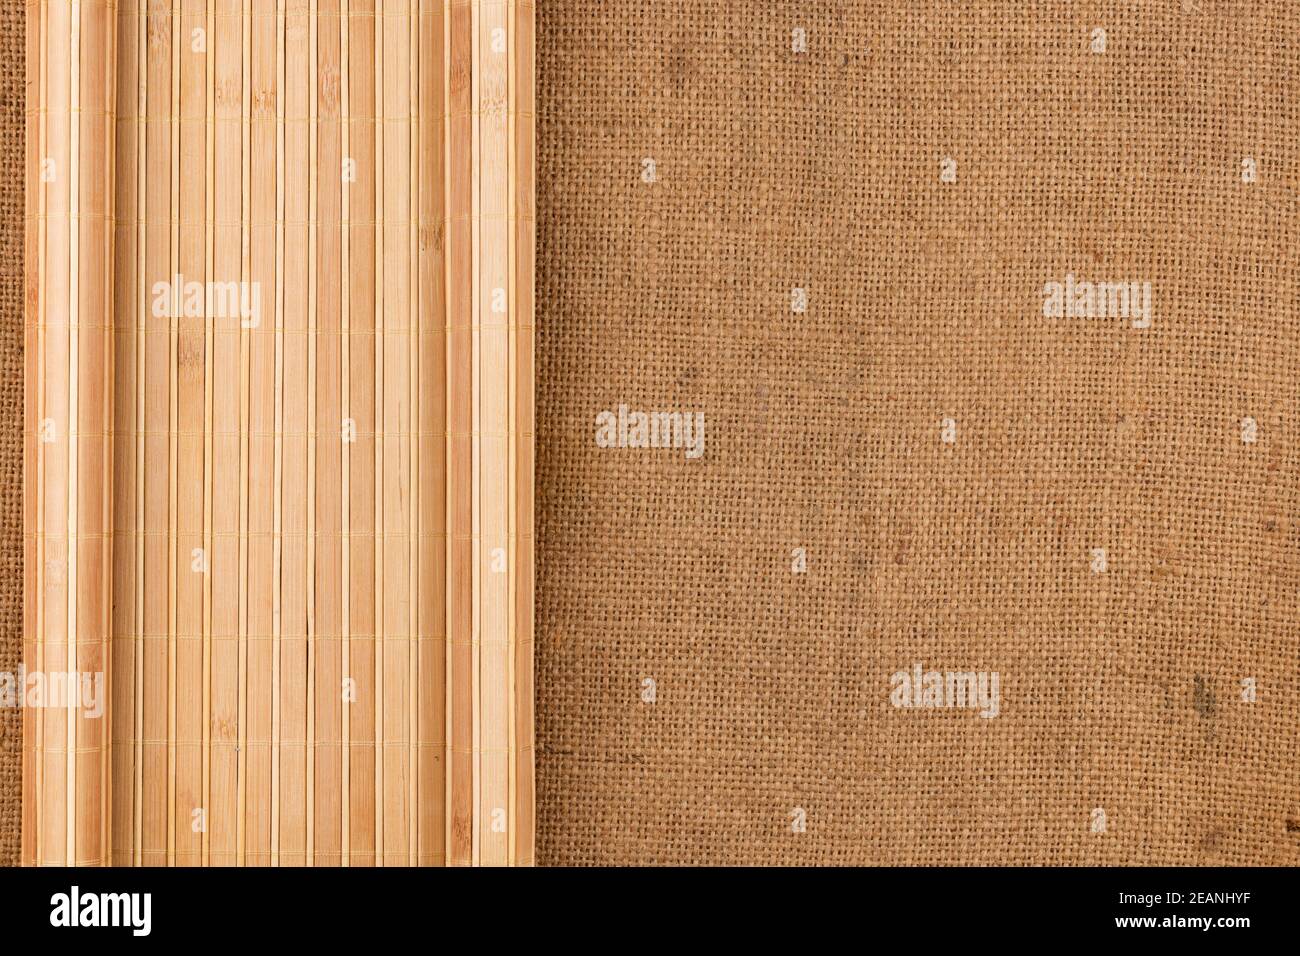 Bamboo mat twisted in the form of a manuscript on sackcloth Stock Photo